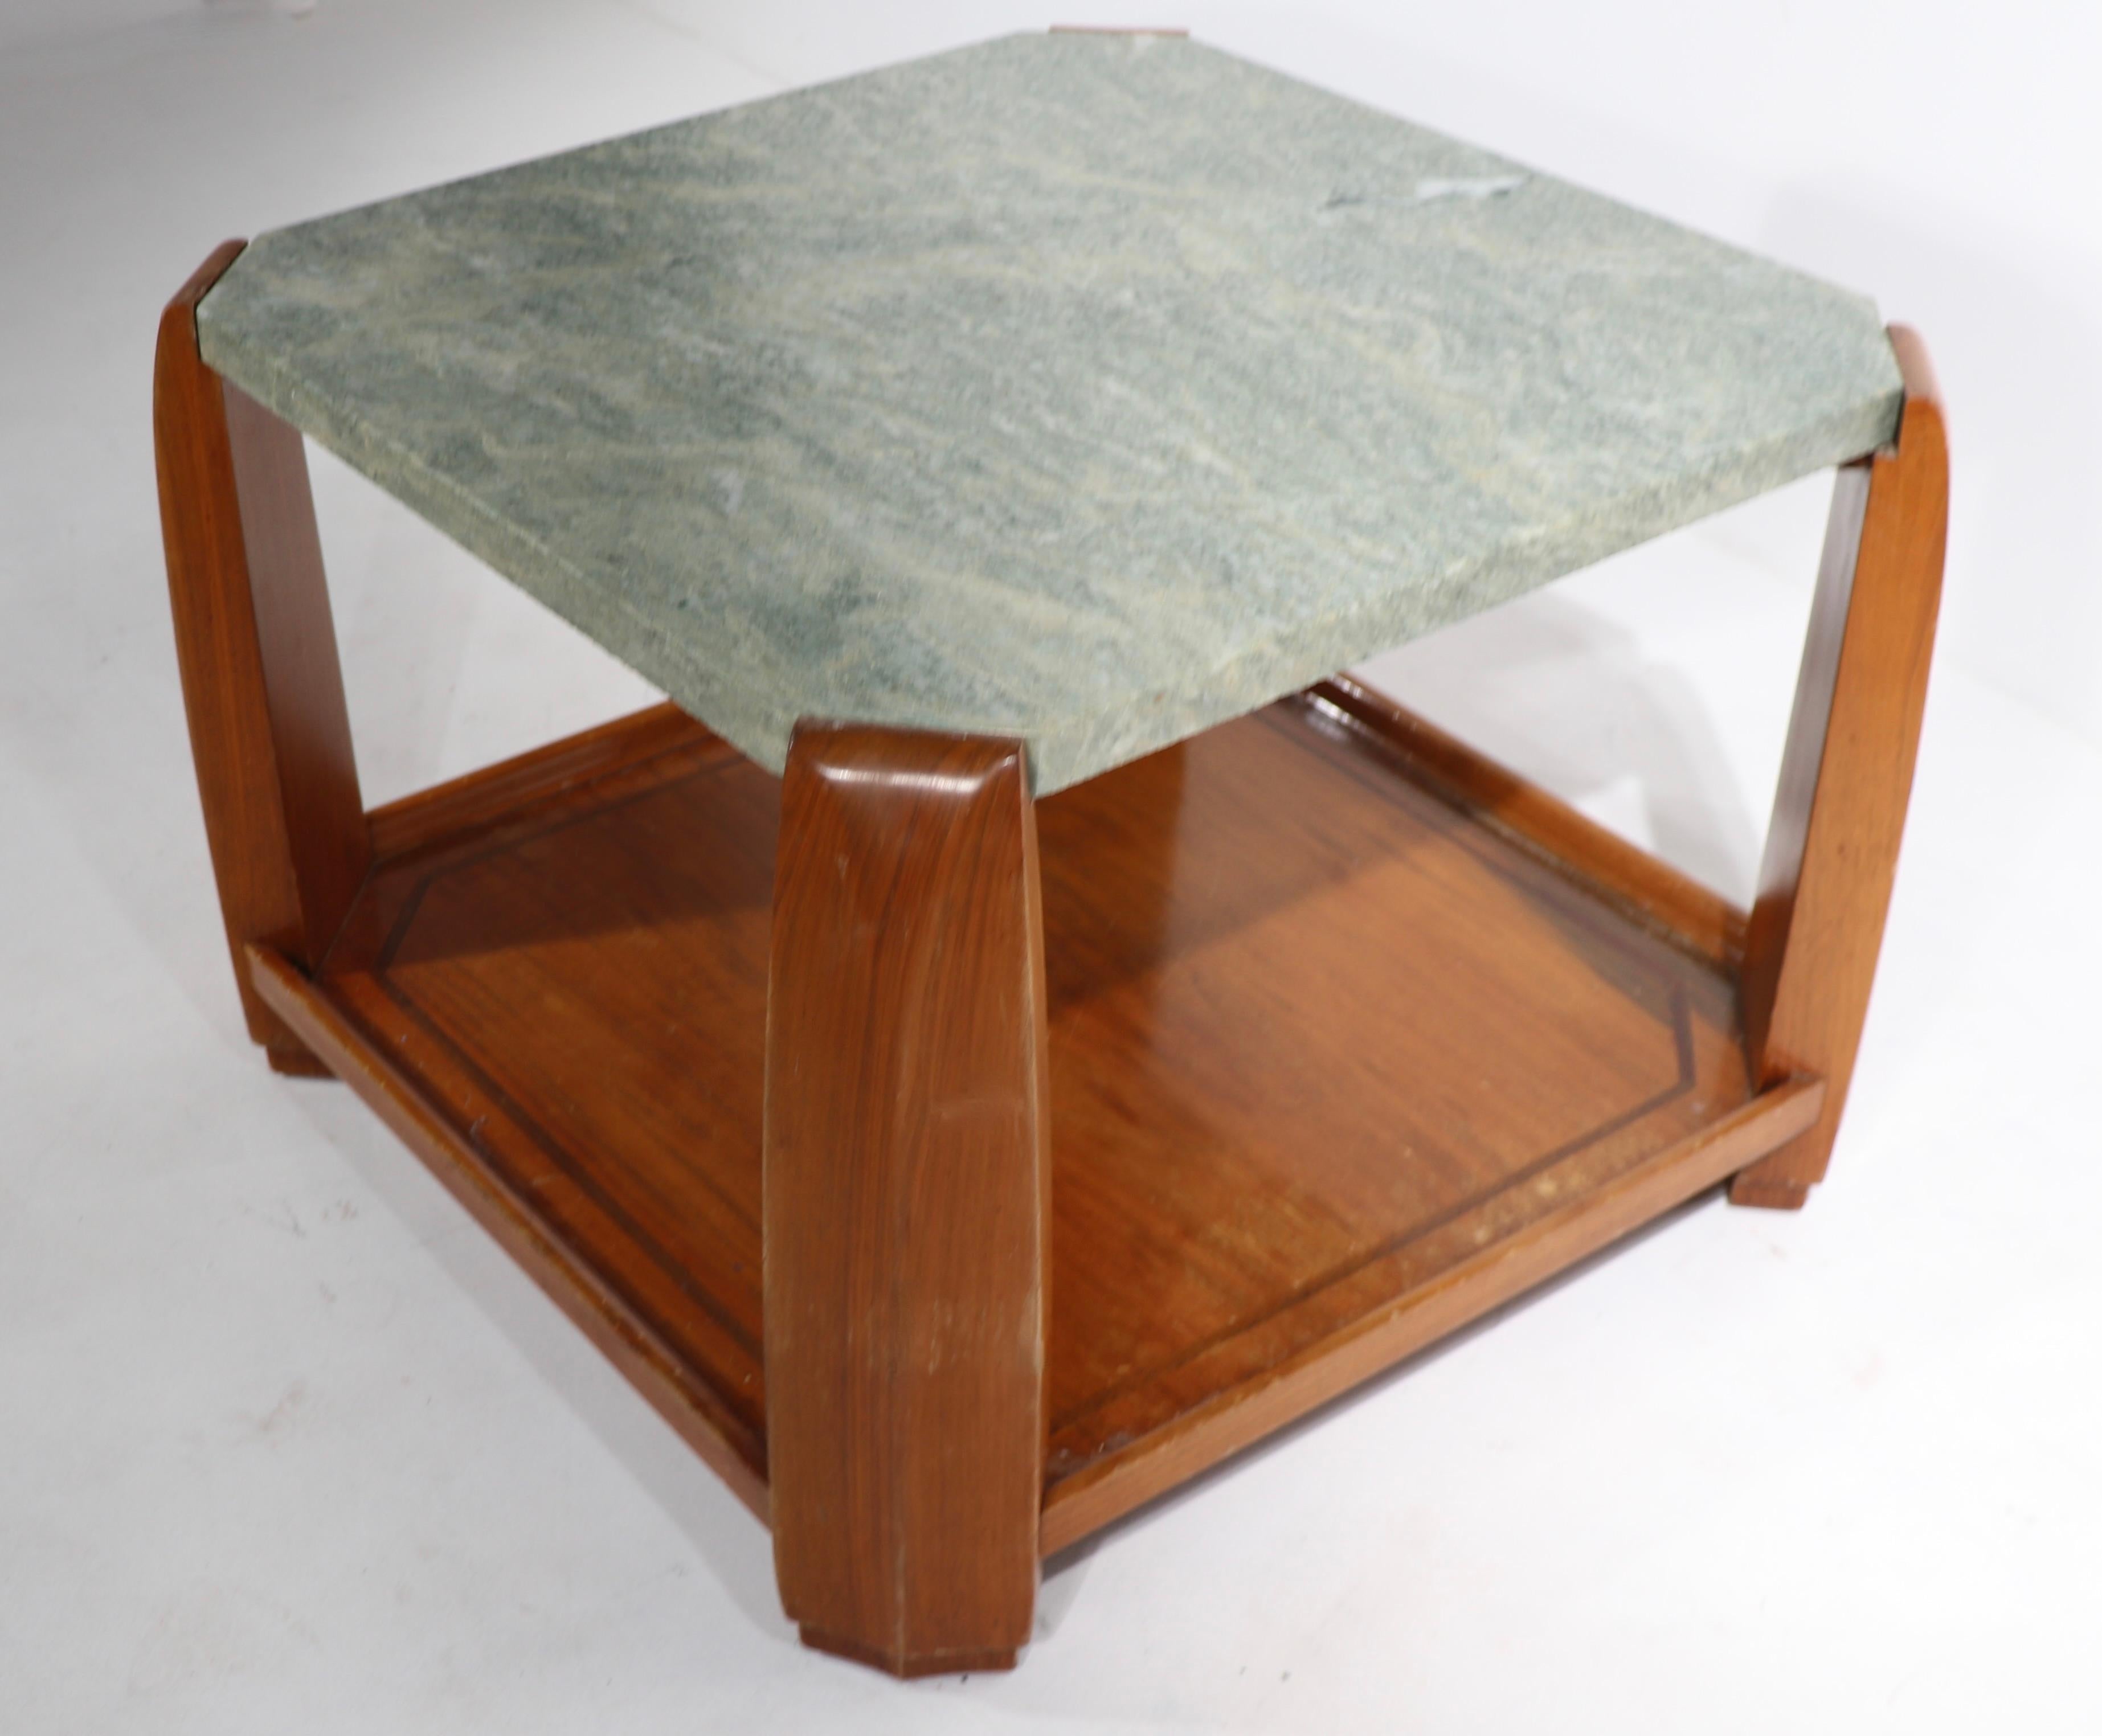 Art Deco period marble top table, with wood base. Continental, in origin - probably German, or possibly French, design after Dufrene. The table is in good, original, estate condition, showing expected cosmetic wear, normal and consistent with age.
